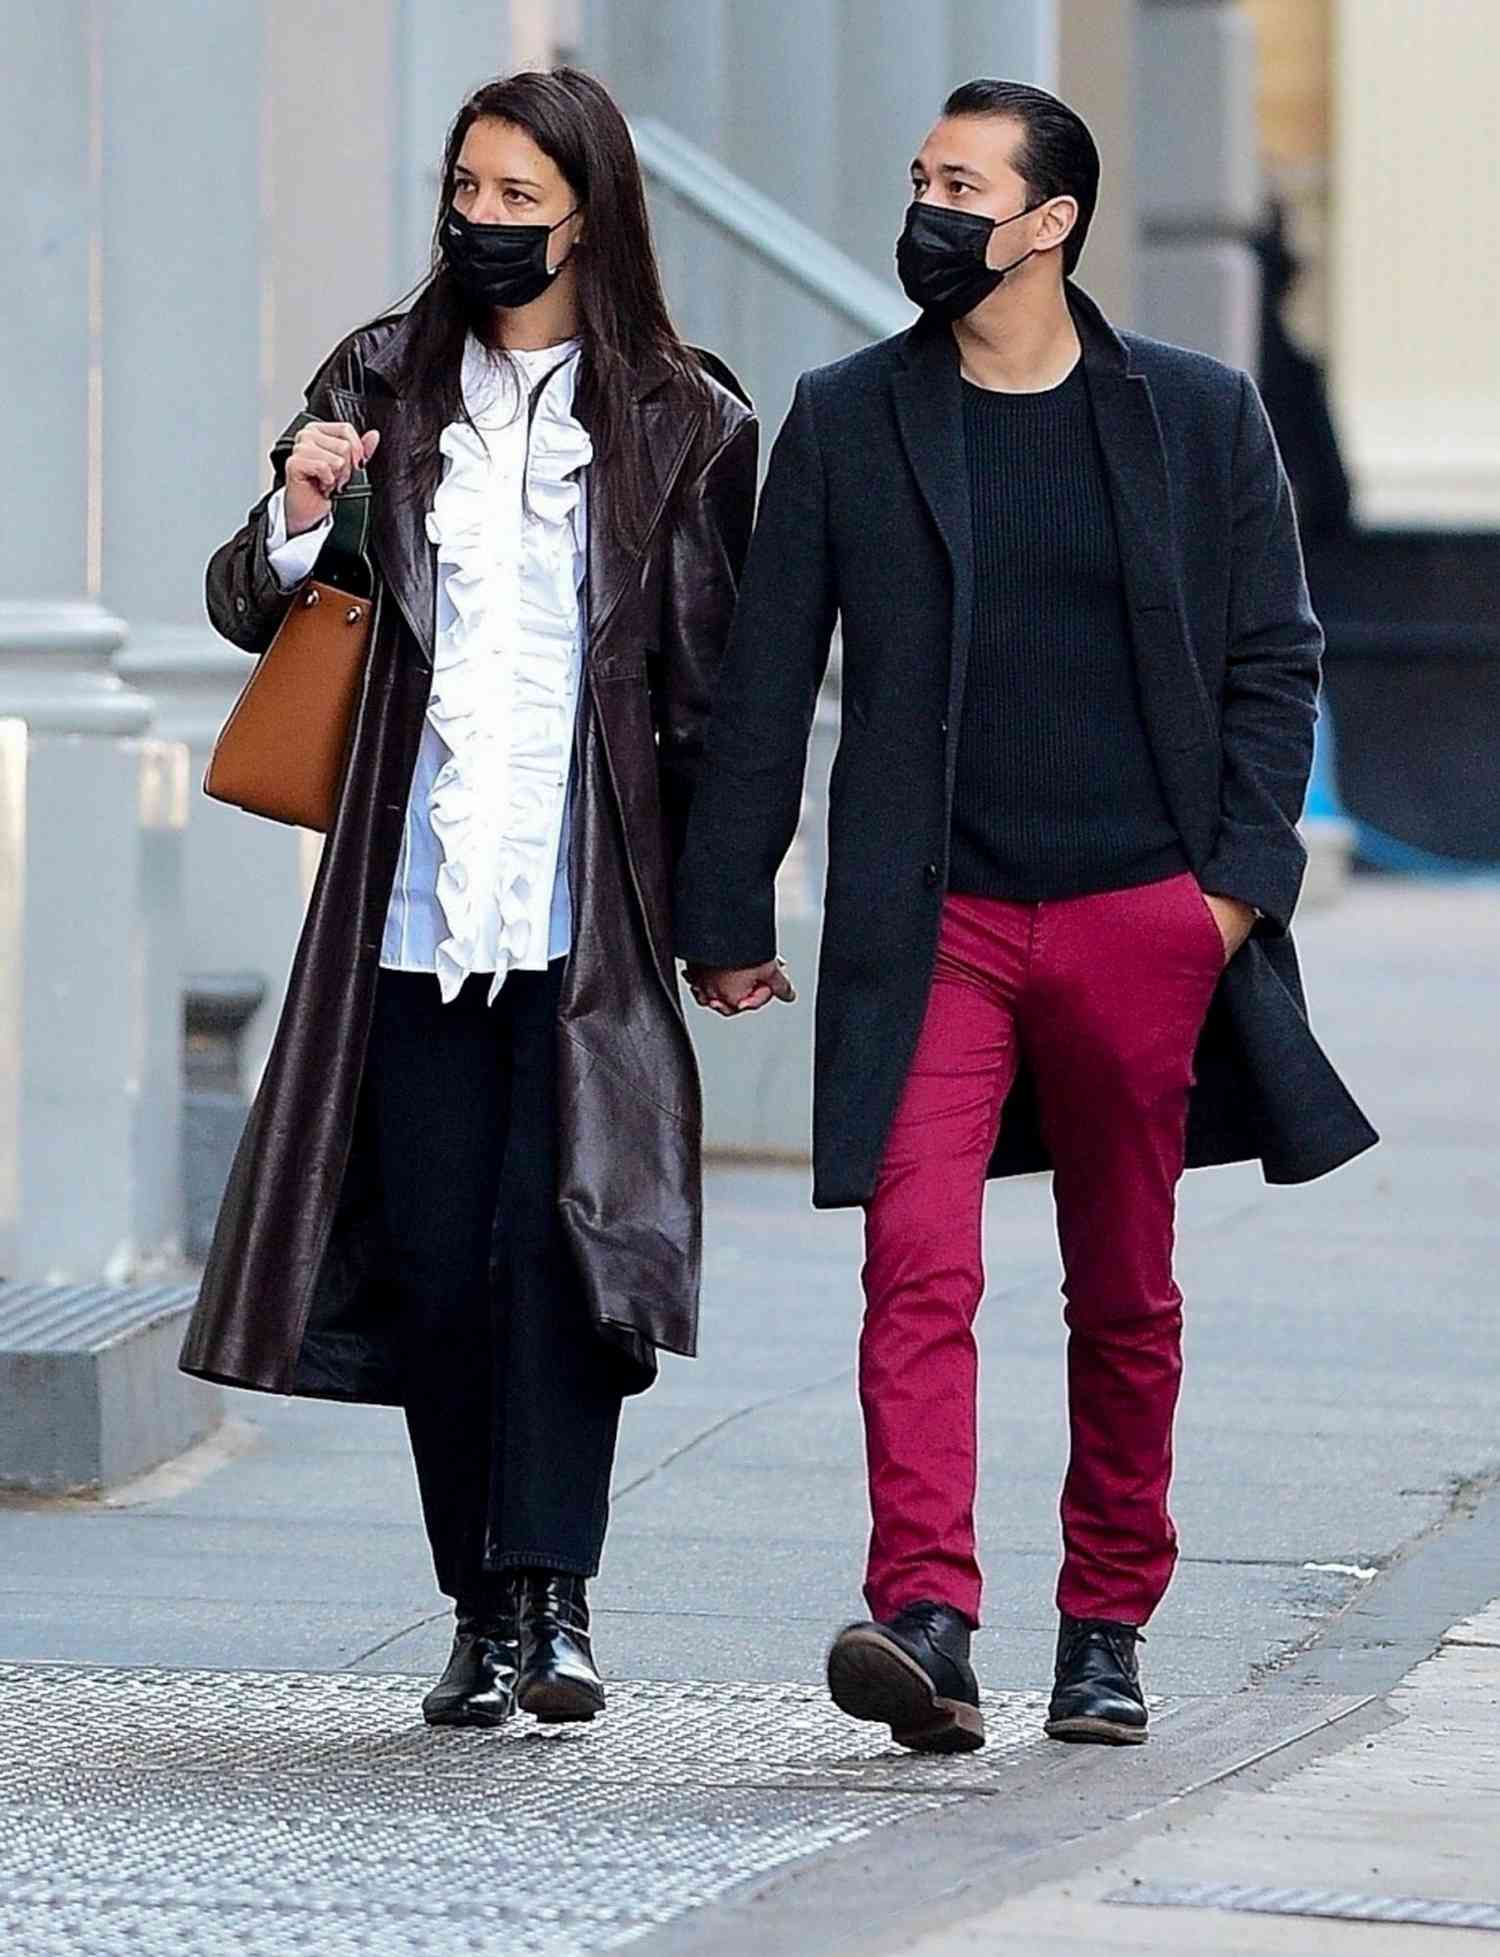 Katie Holmes and Emilio Vitolo Jr. hold hands as they go shopping in NYC